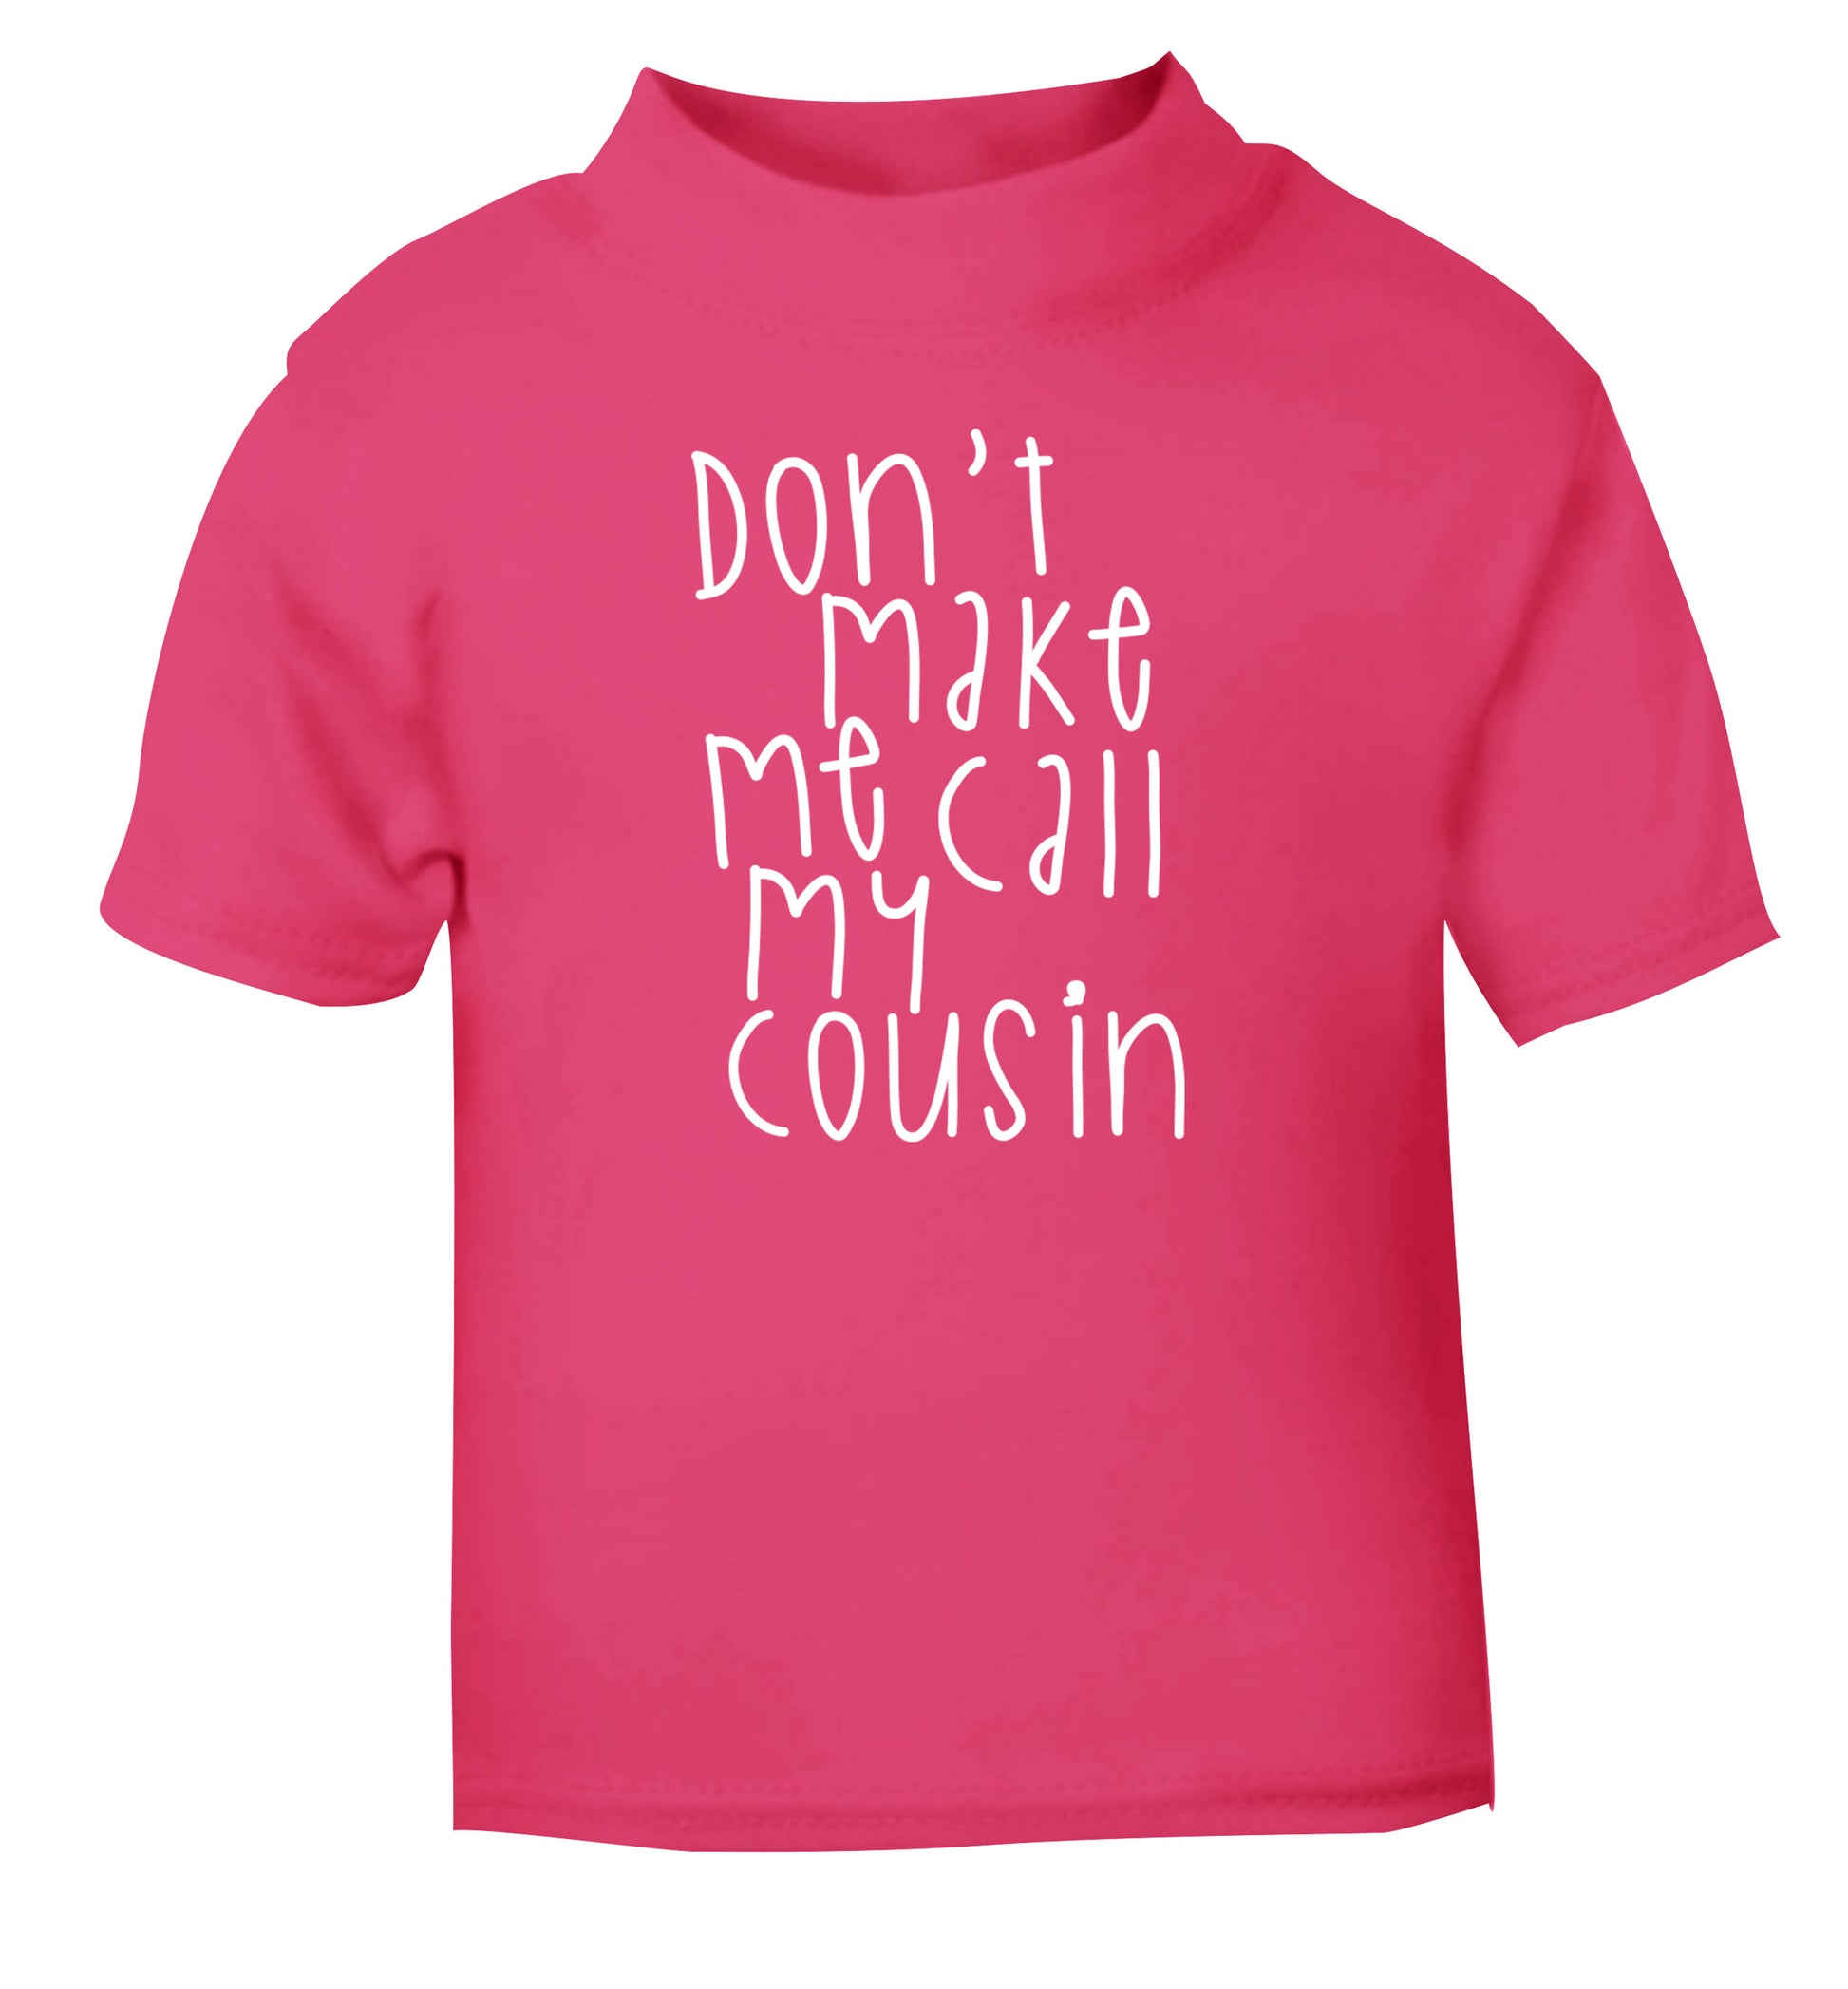 Don't make me call my cousin pink Baby Toddler Tshirt 2 Years